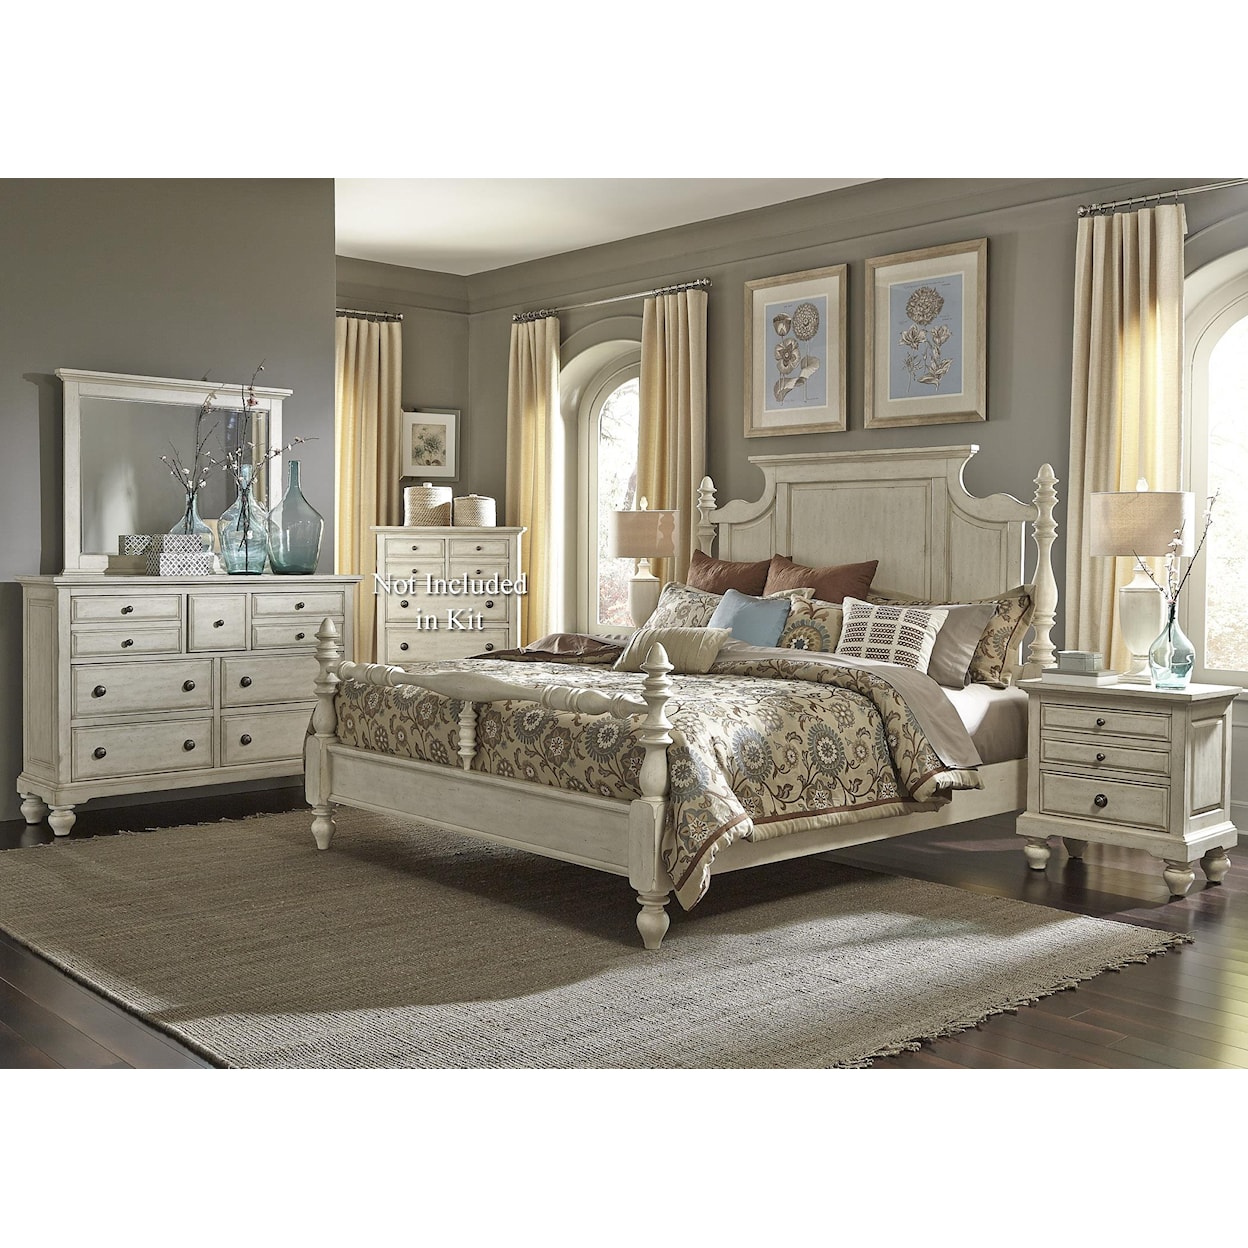 Liberty Furniture High Country 797 Queen Bedroom Group